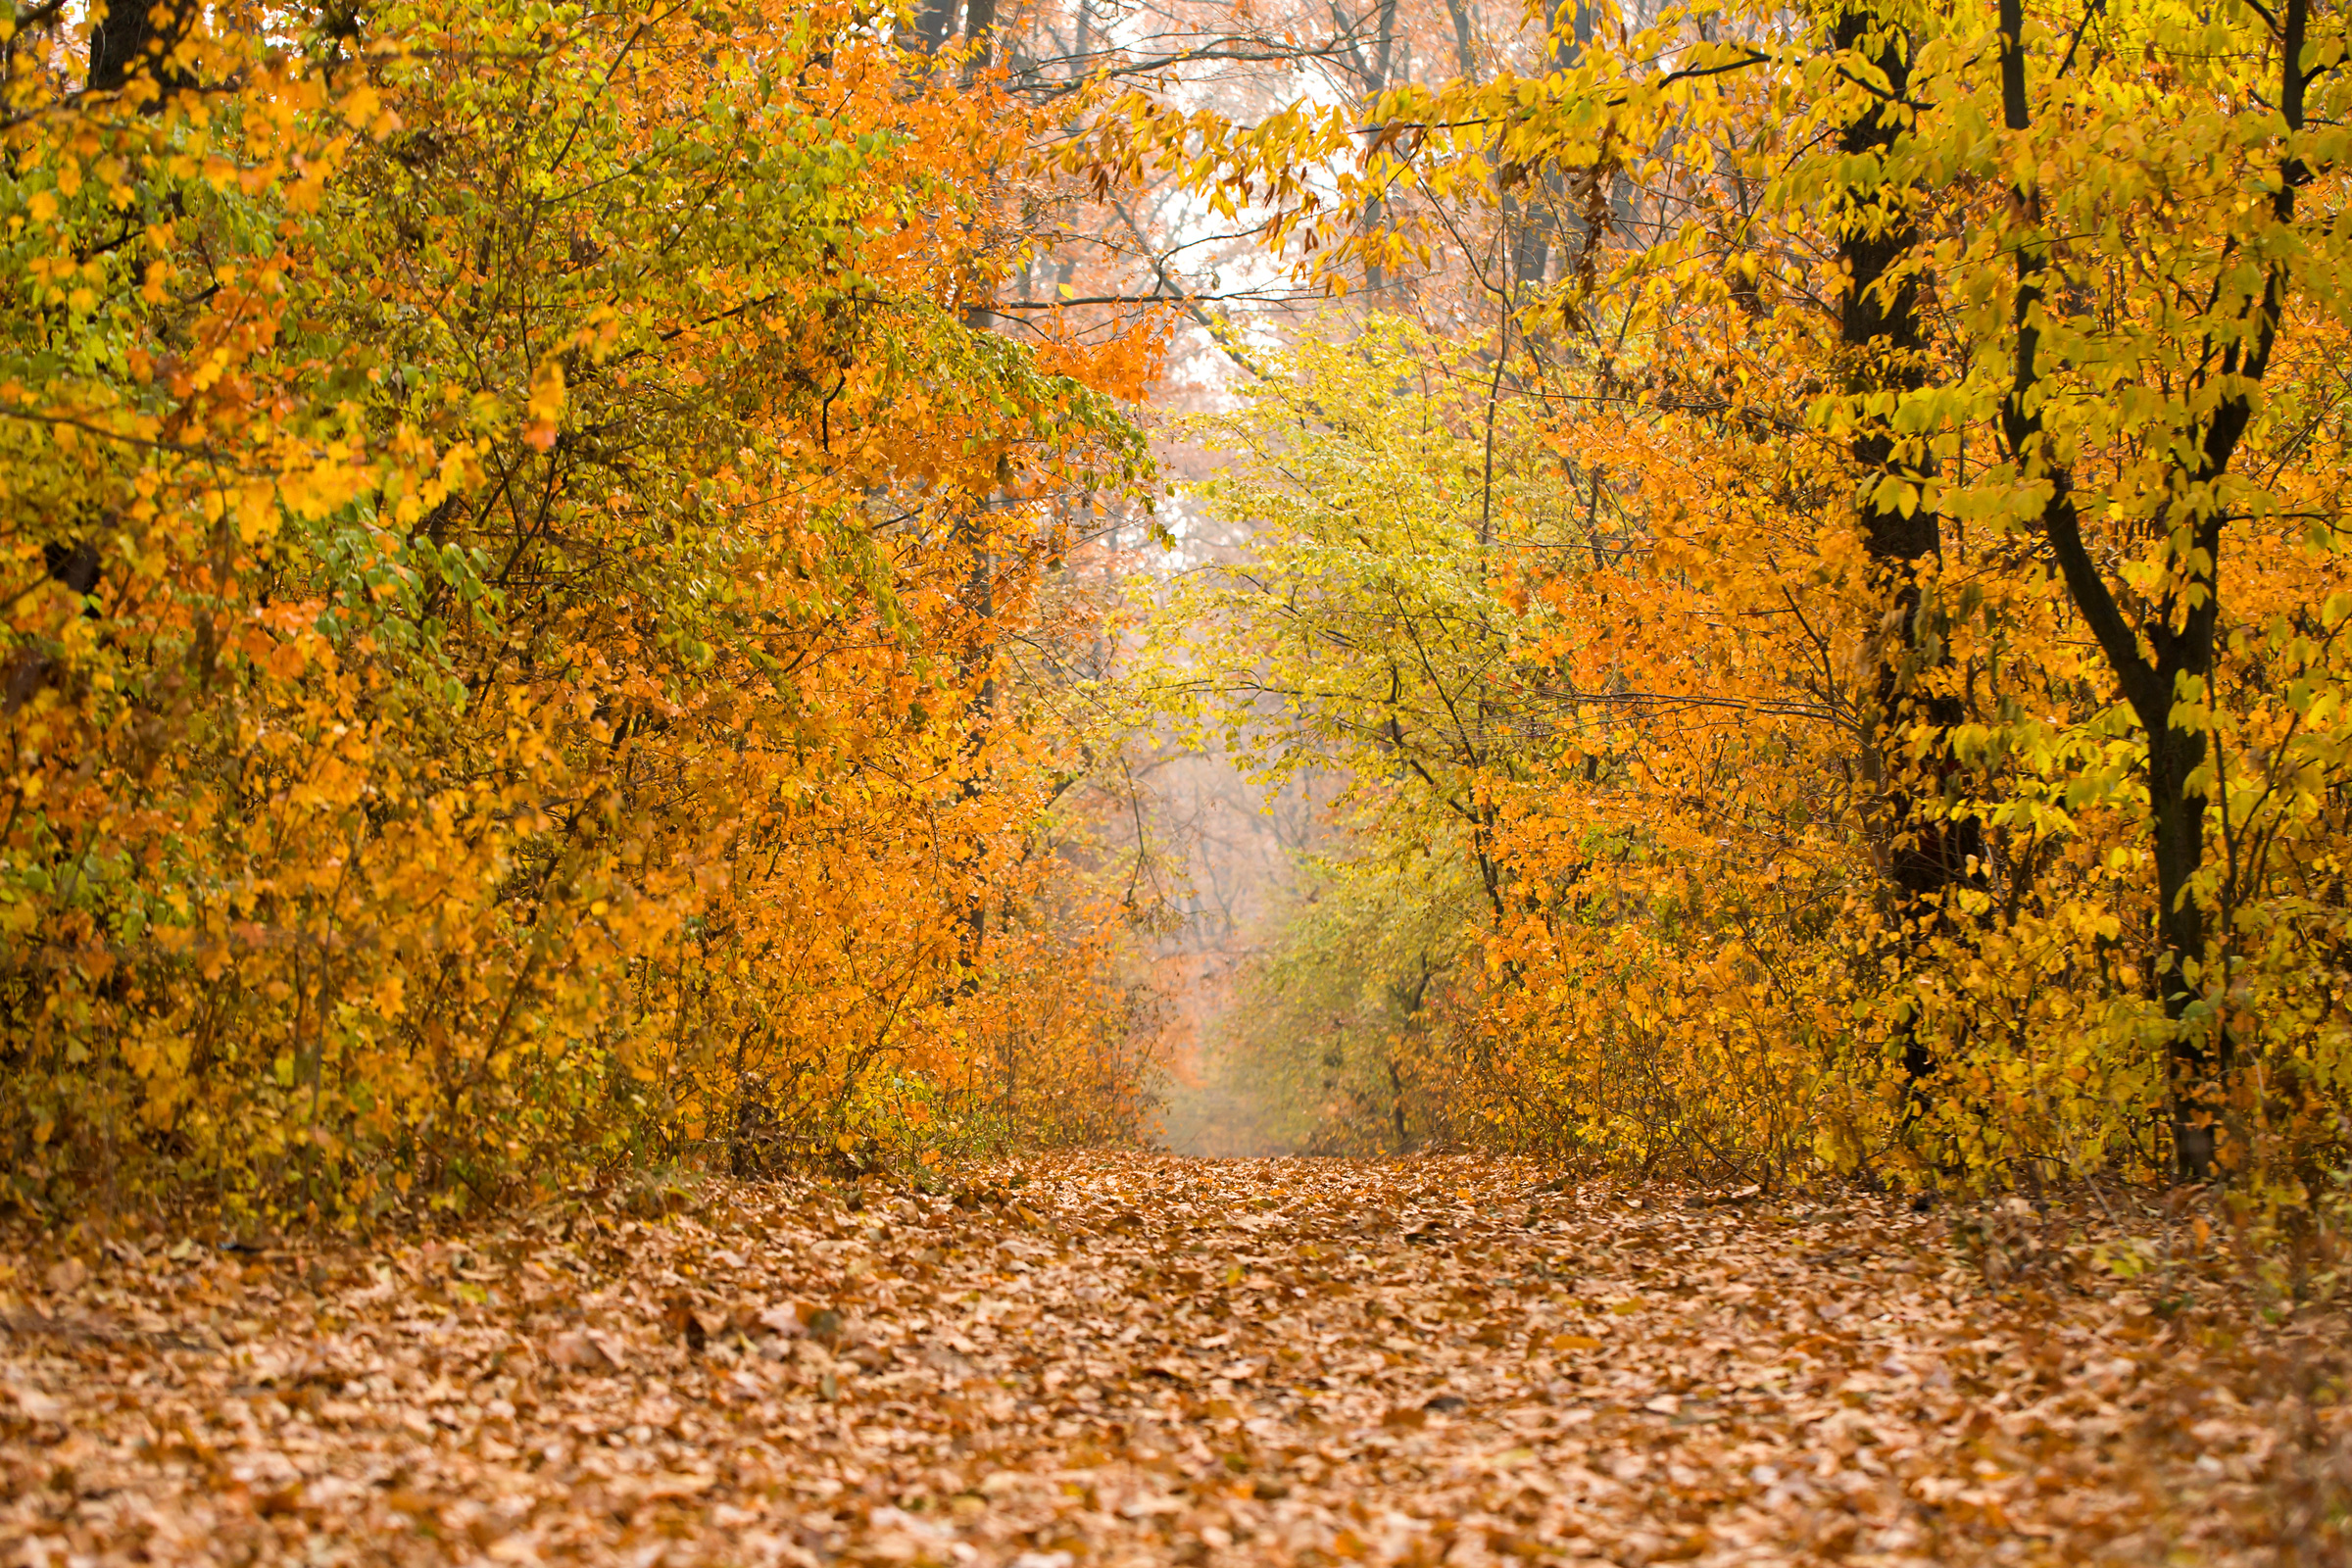 Forest path in bright colors of late autumn